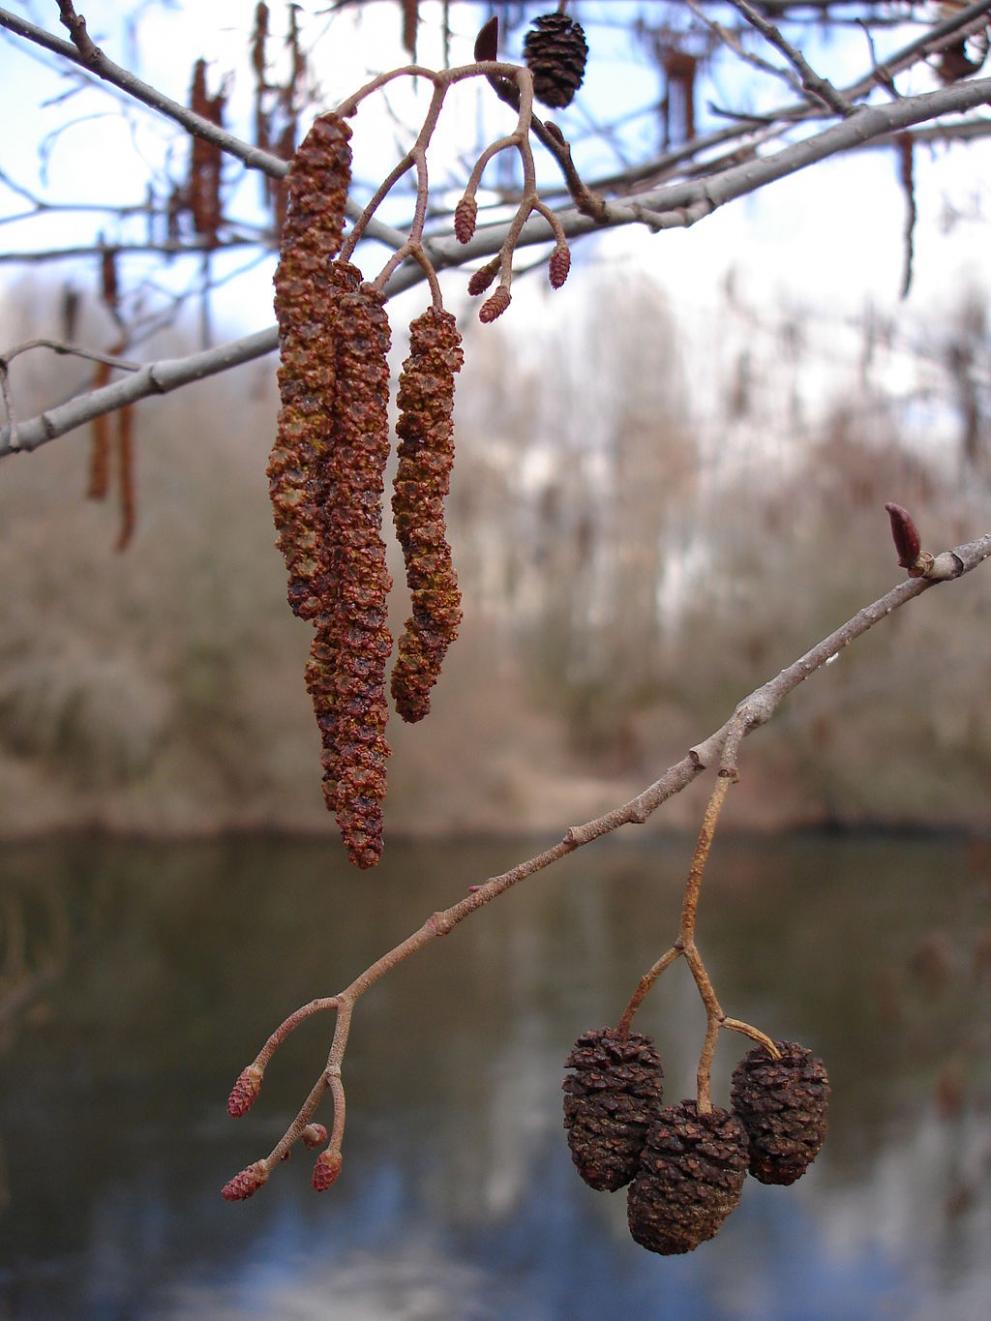 Male and female catkins in spring alongside old fruits that remained on the plant through winter